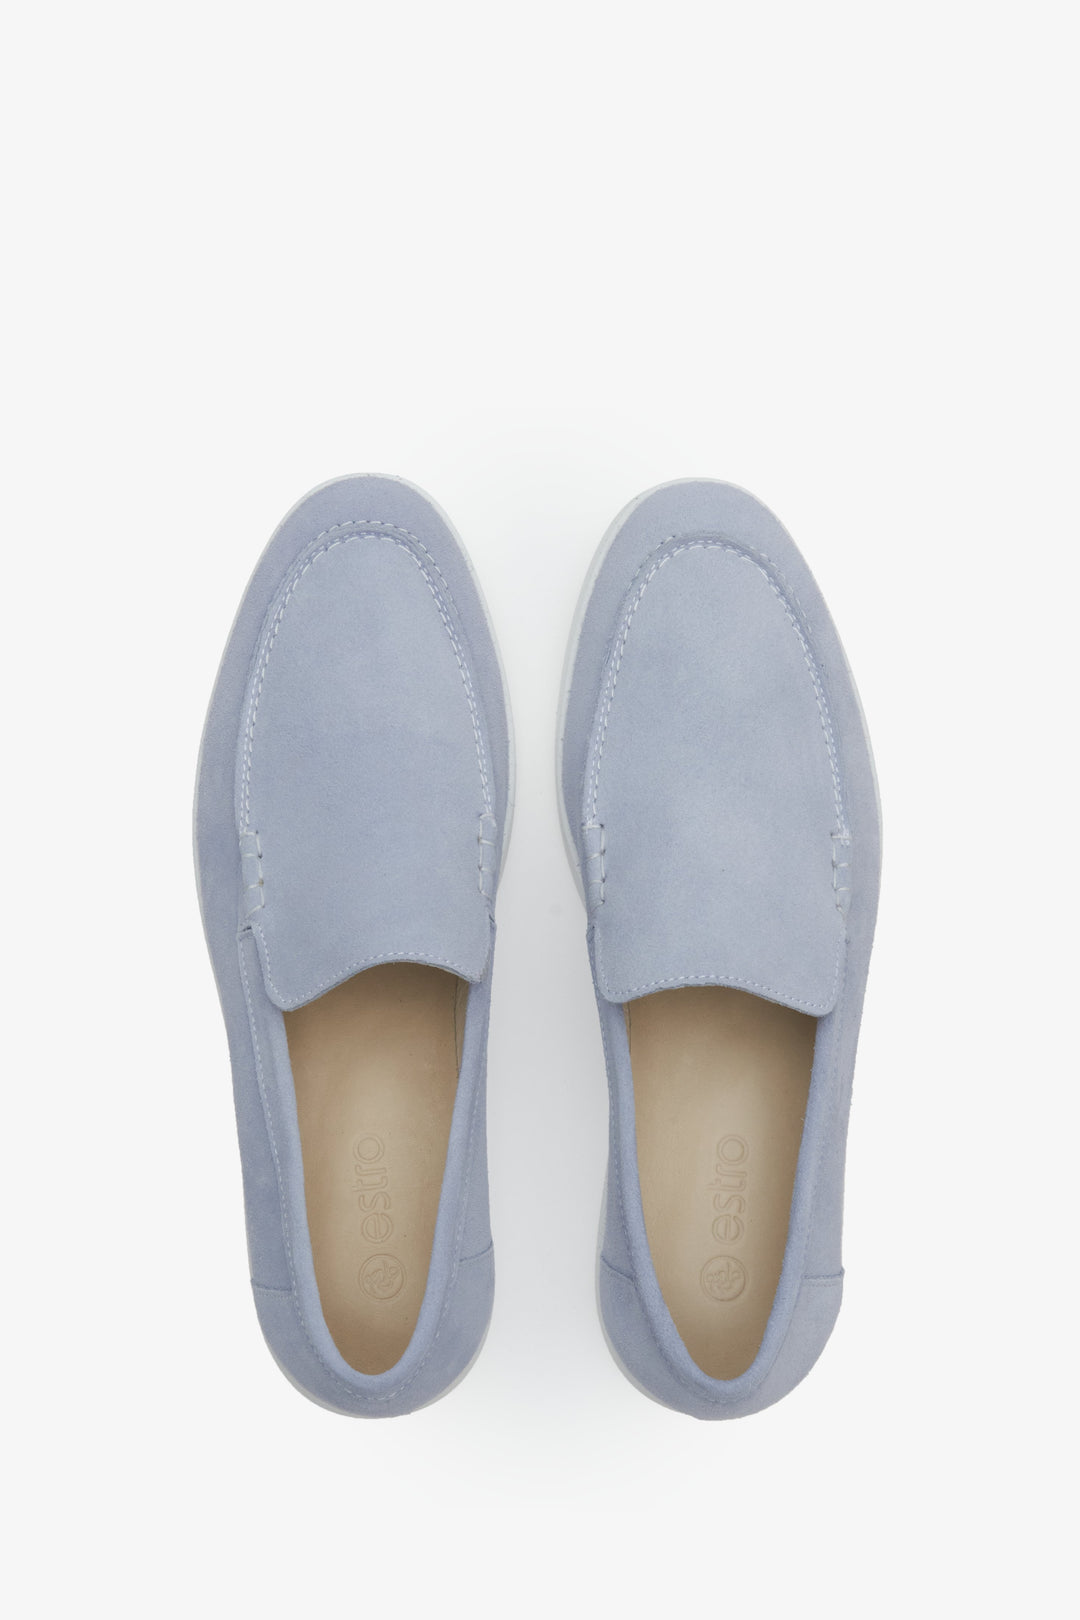 Women's suede moccasins in light blue Estro - presentation of footwear from above.